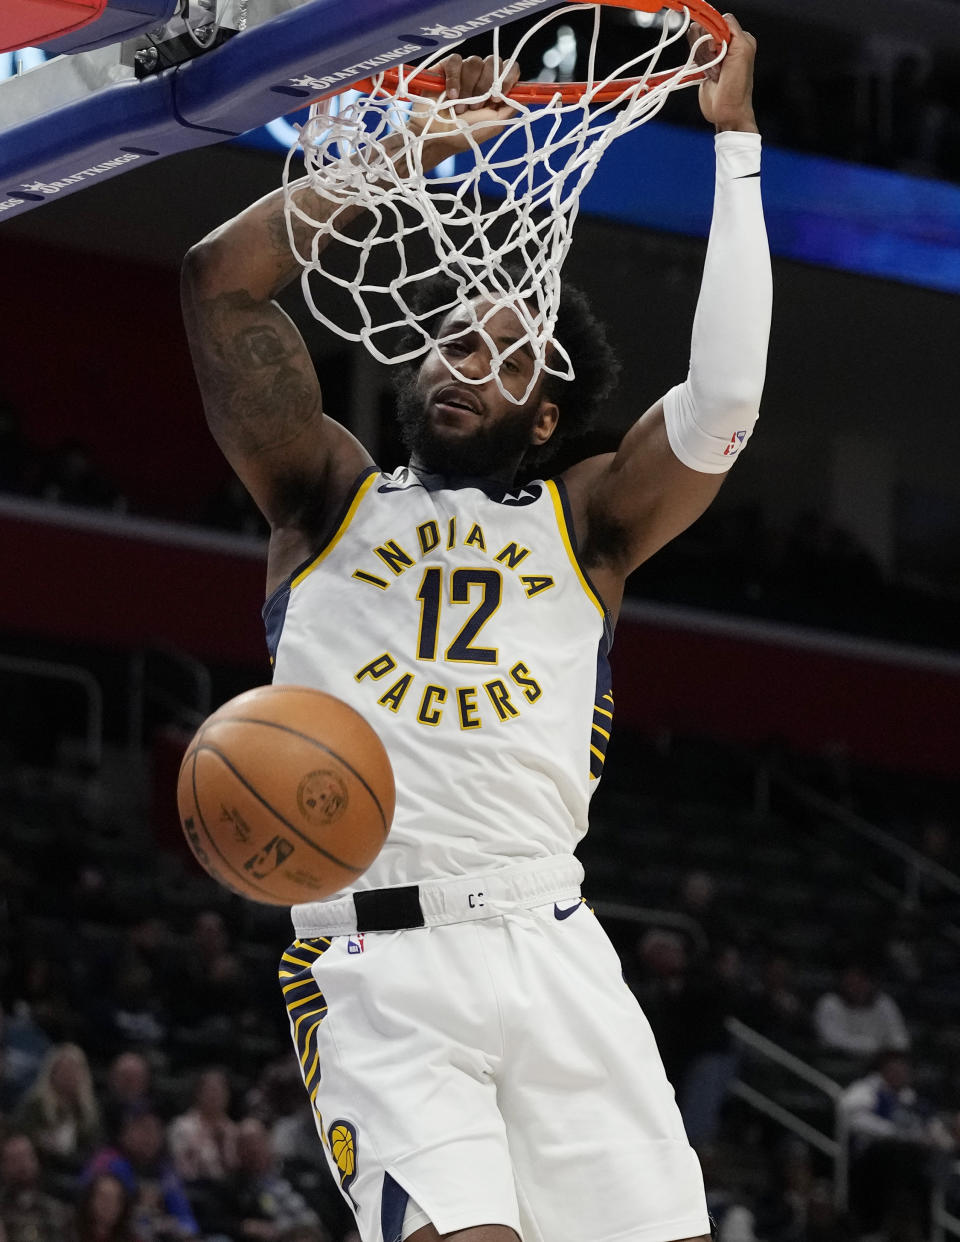 Indiana Pacers forward Oshae Brissett dunks during the second half of an NBA basketball game against the Detroit Pistons, Monday, March 13, 2023, in Detroit. (AP Photo/Carlos Osorio)